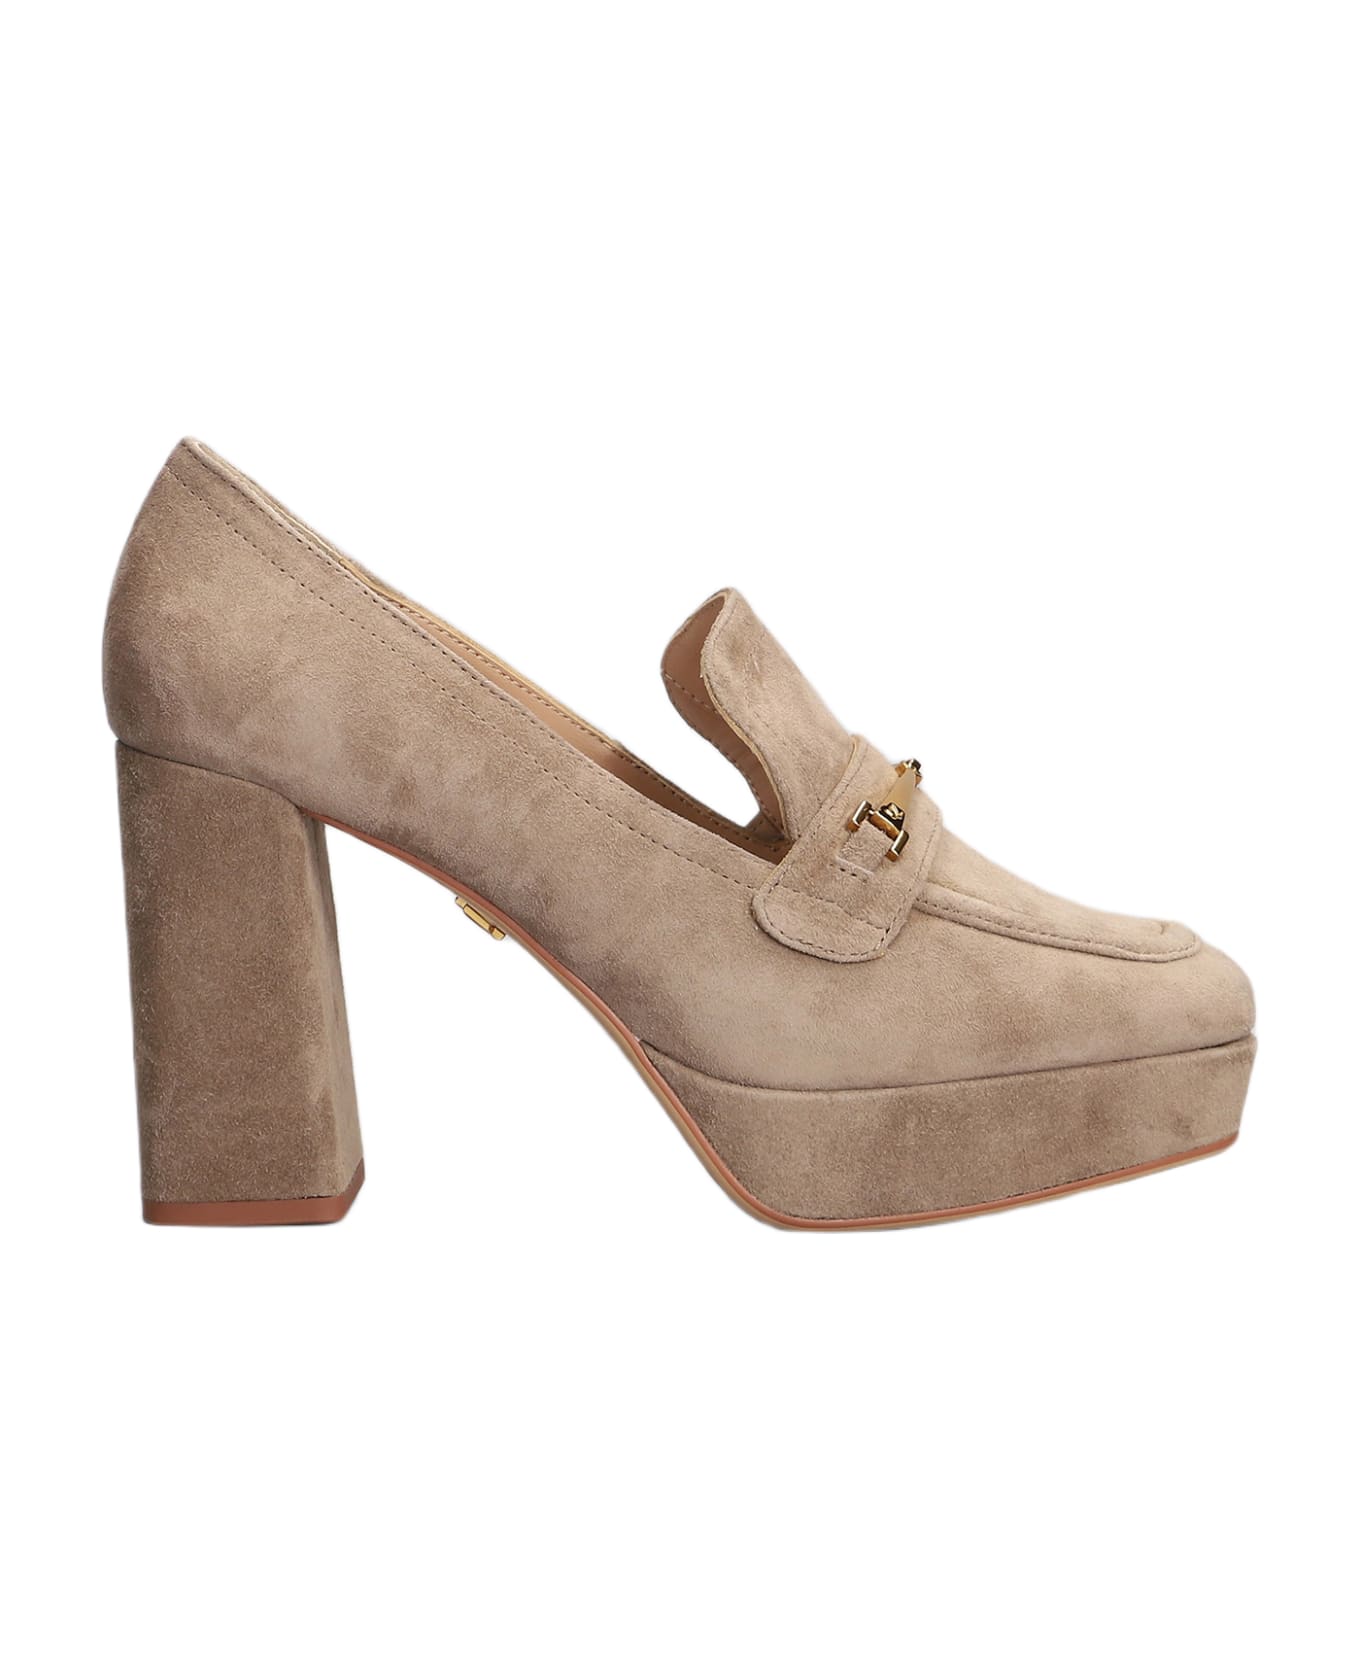 Lola Cruz Pumps In Taupe Suede - taupe